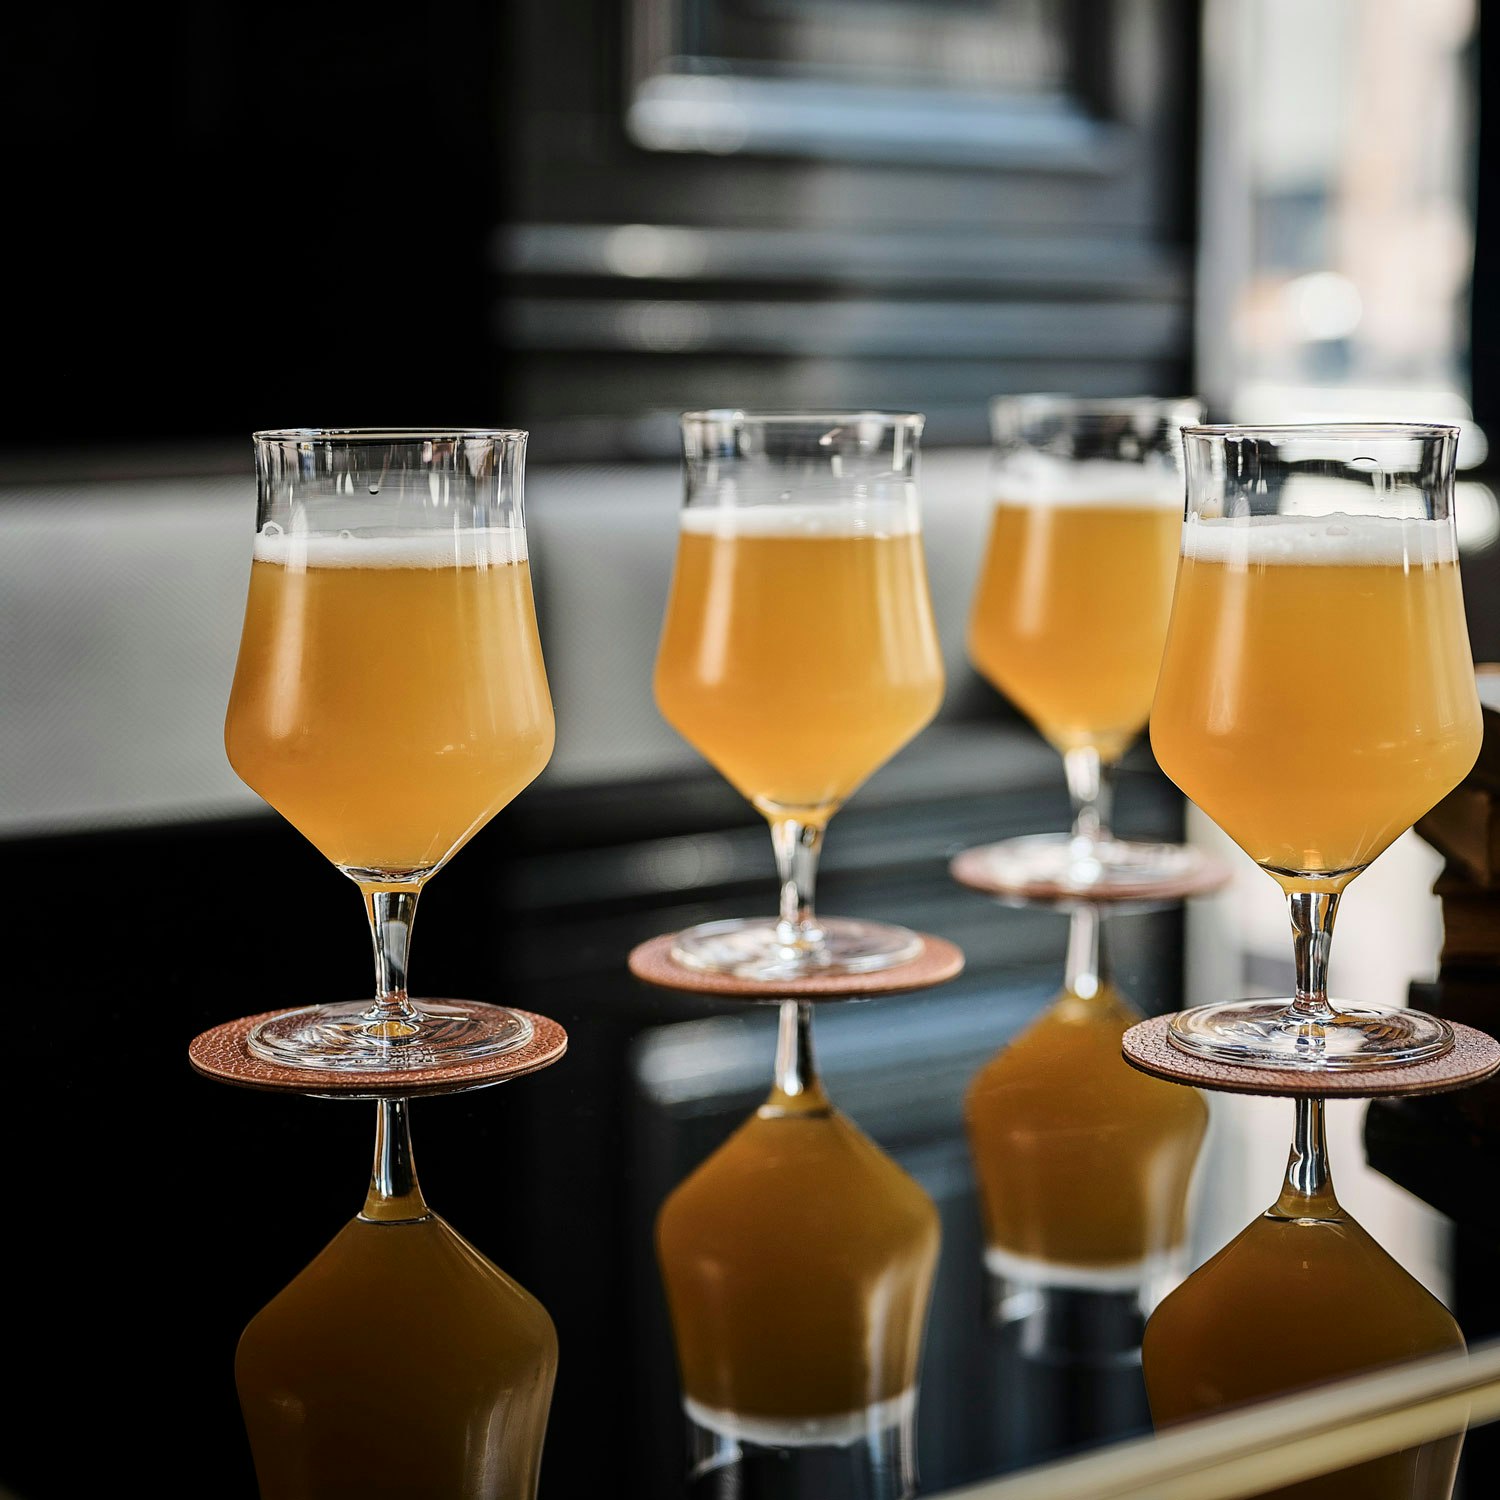 Why We Love the Teku Beer Glass